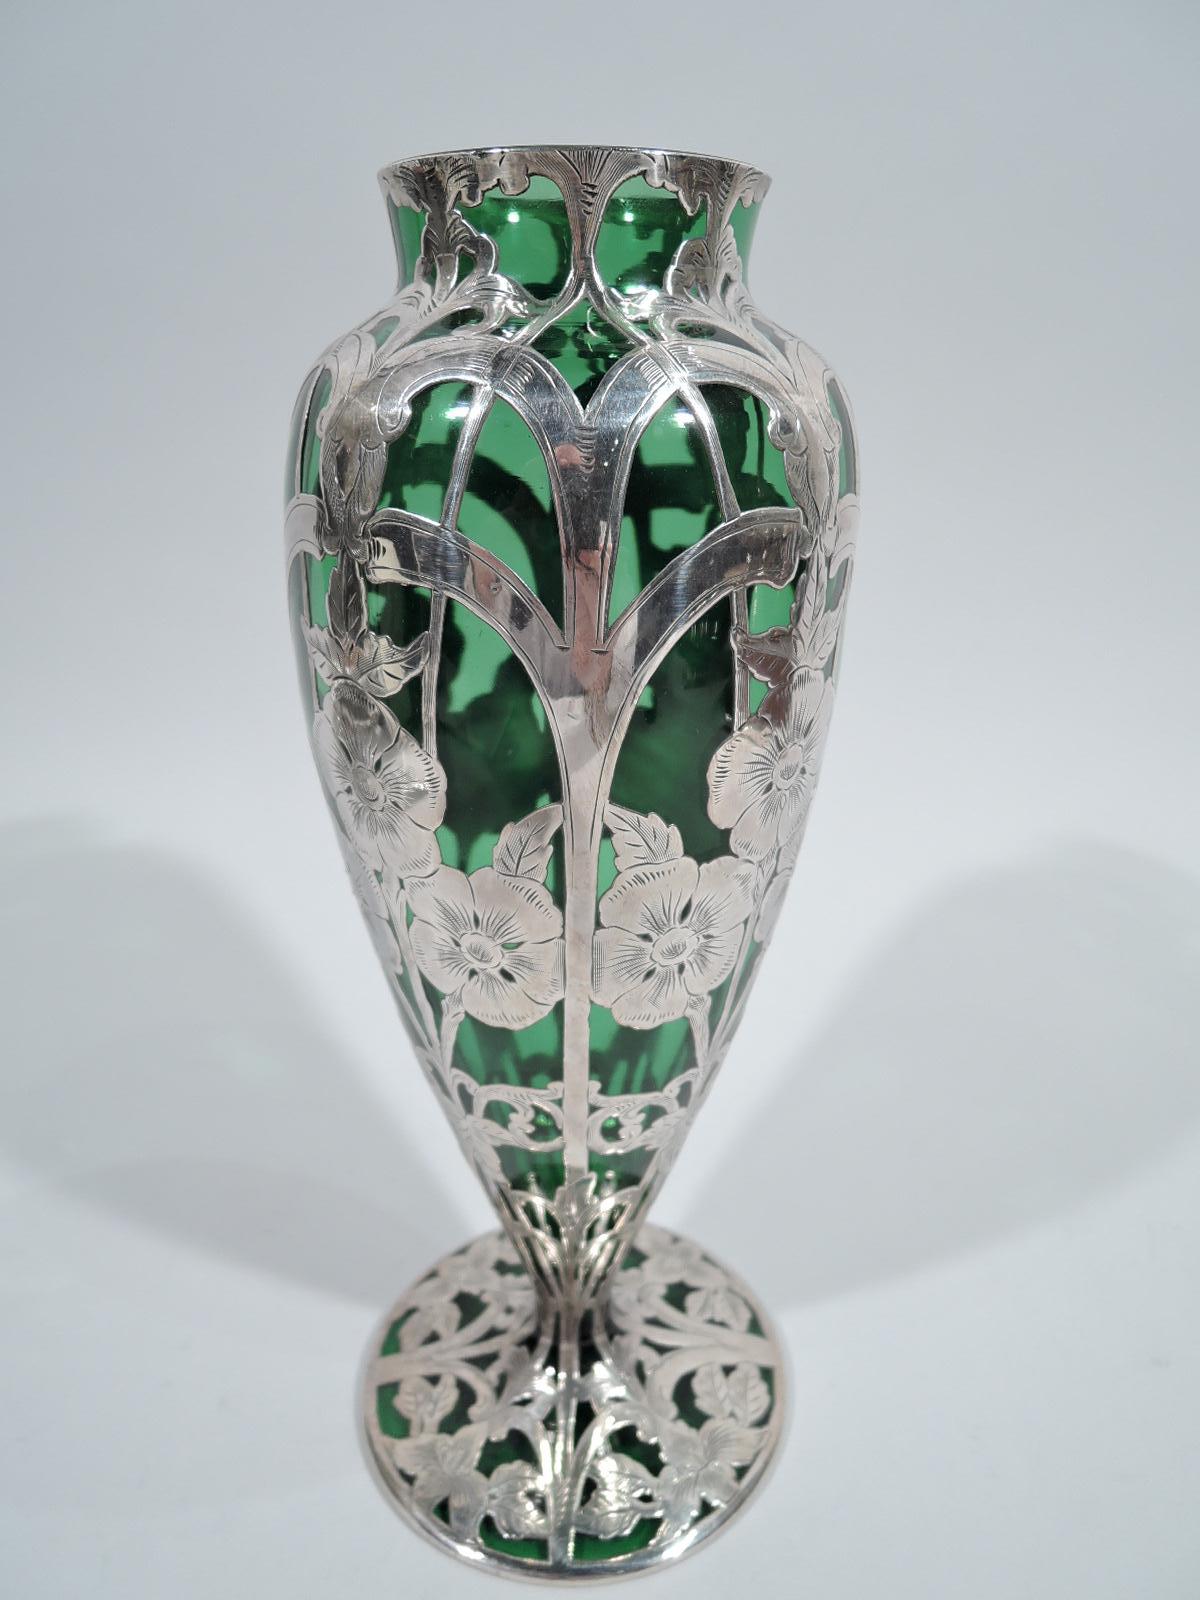 Turn-of-the-century Art Nouveau glass vase with engraved silver overlay. Ovoid with short and straight neck, and flat and round foot. Overlay in form of stem flowers on vertical trellis lines with double arcade. Glass is green. Fully marked